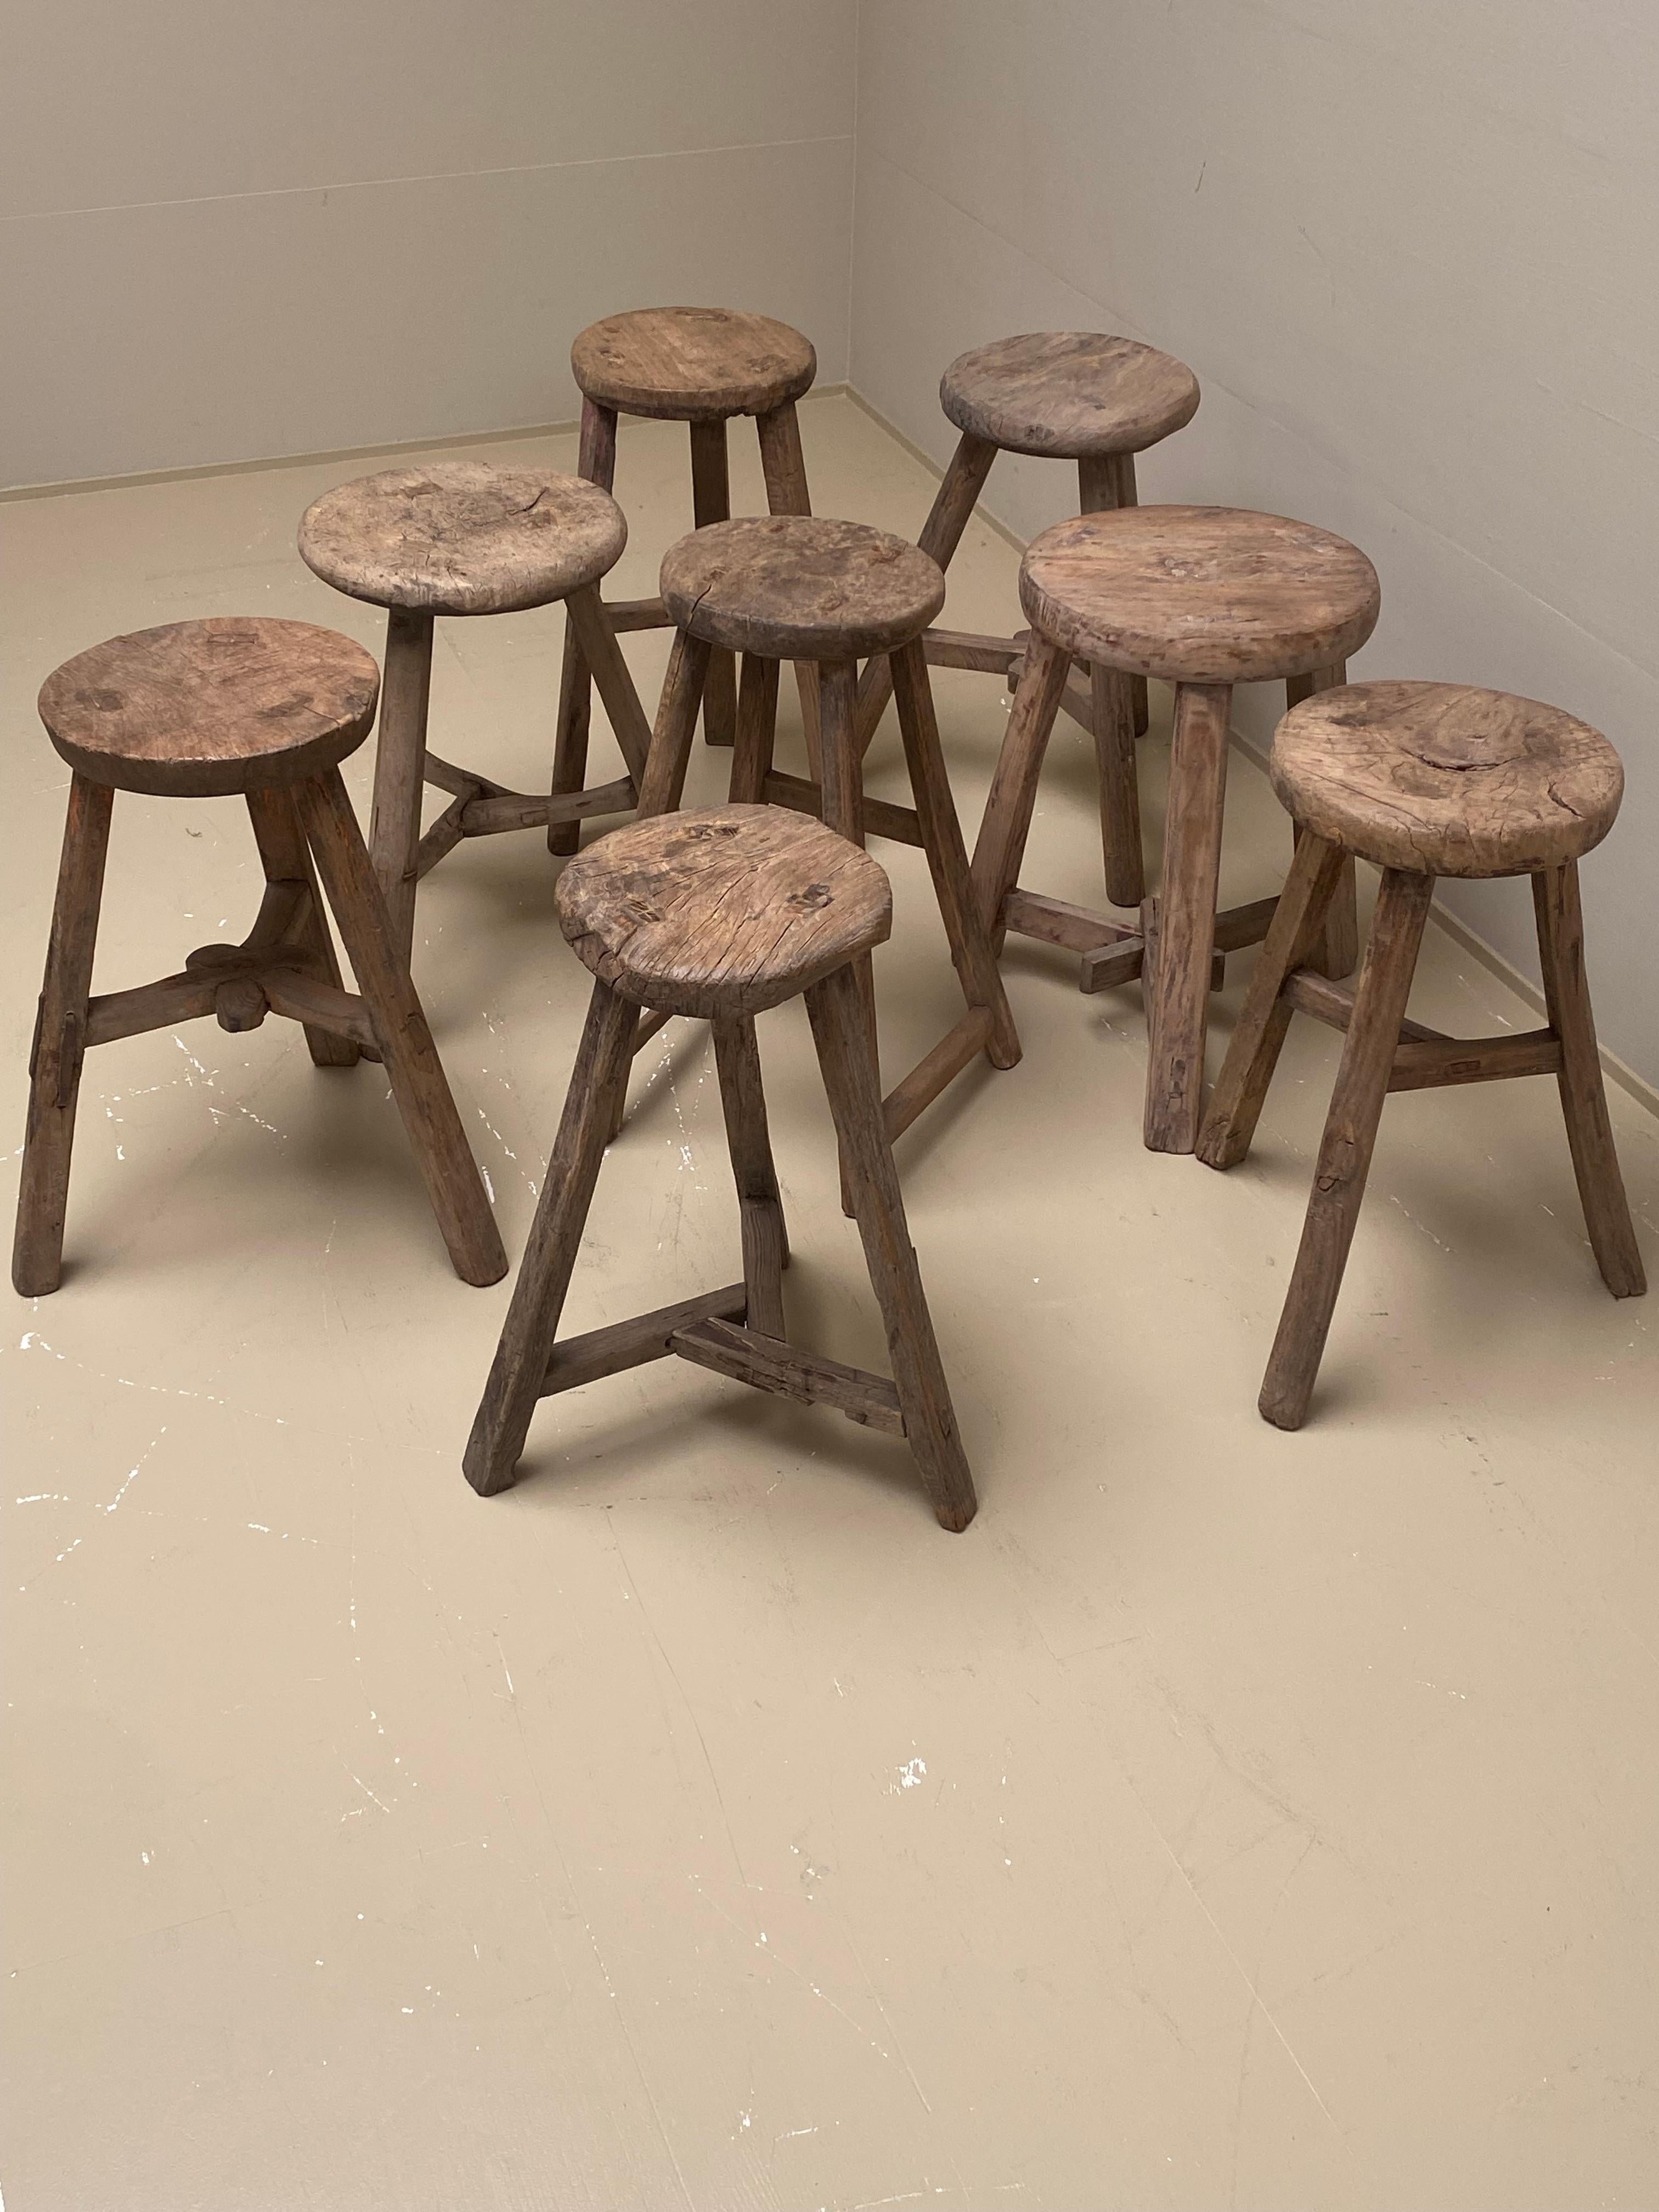 Chinese Set of 8 Vintage Elm Round Wooden Rustic Stools